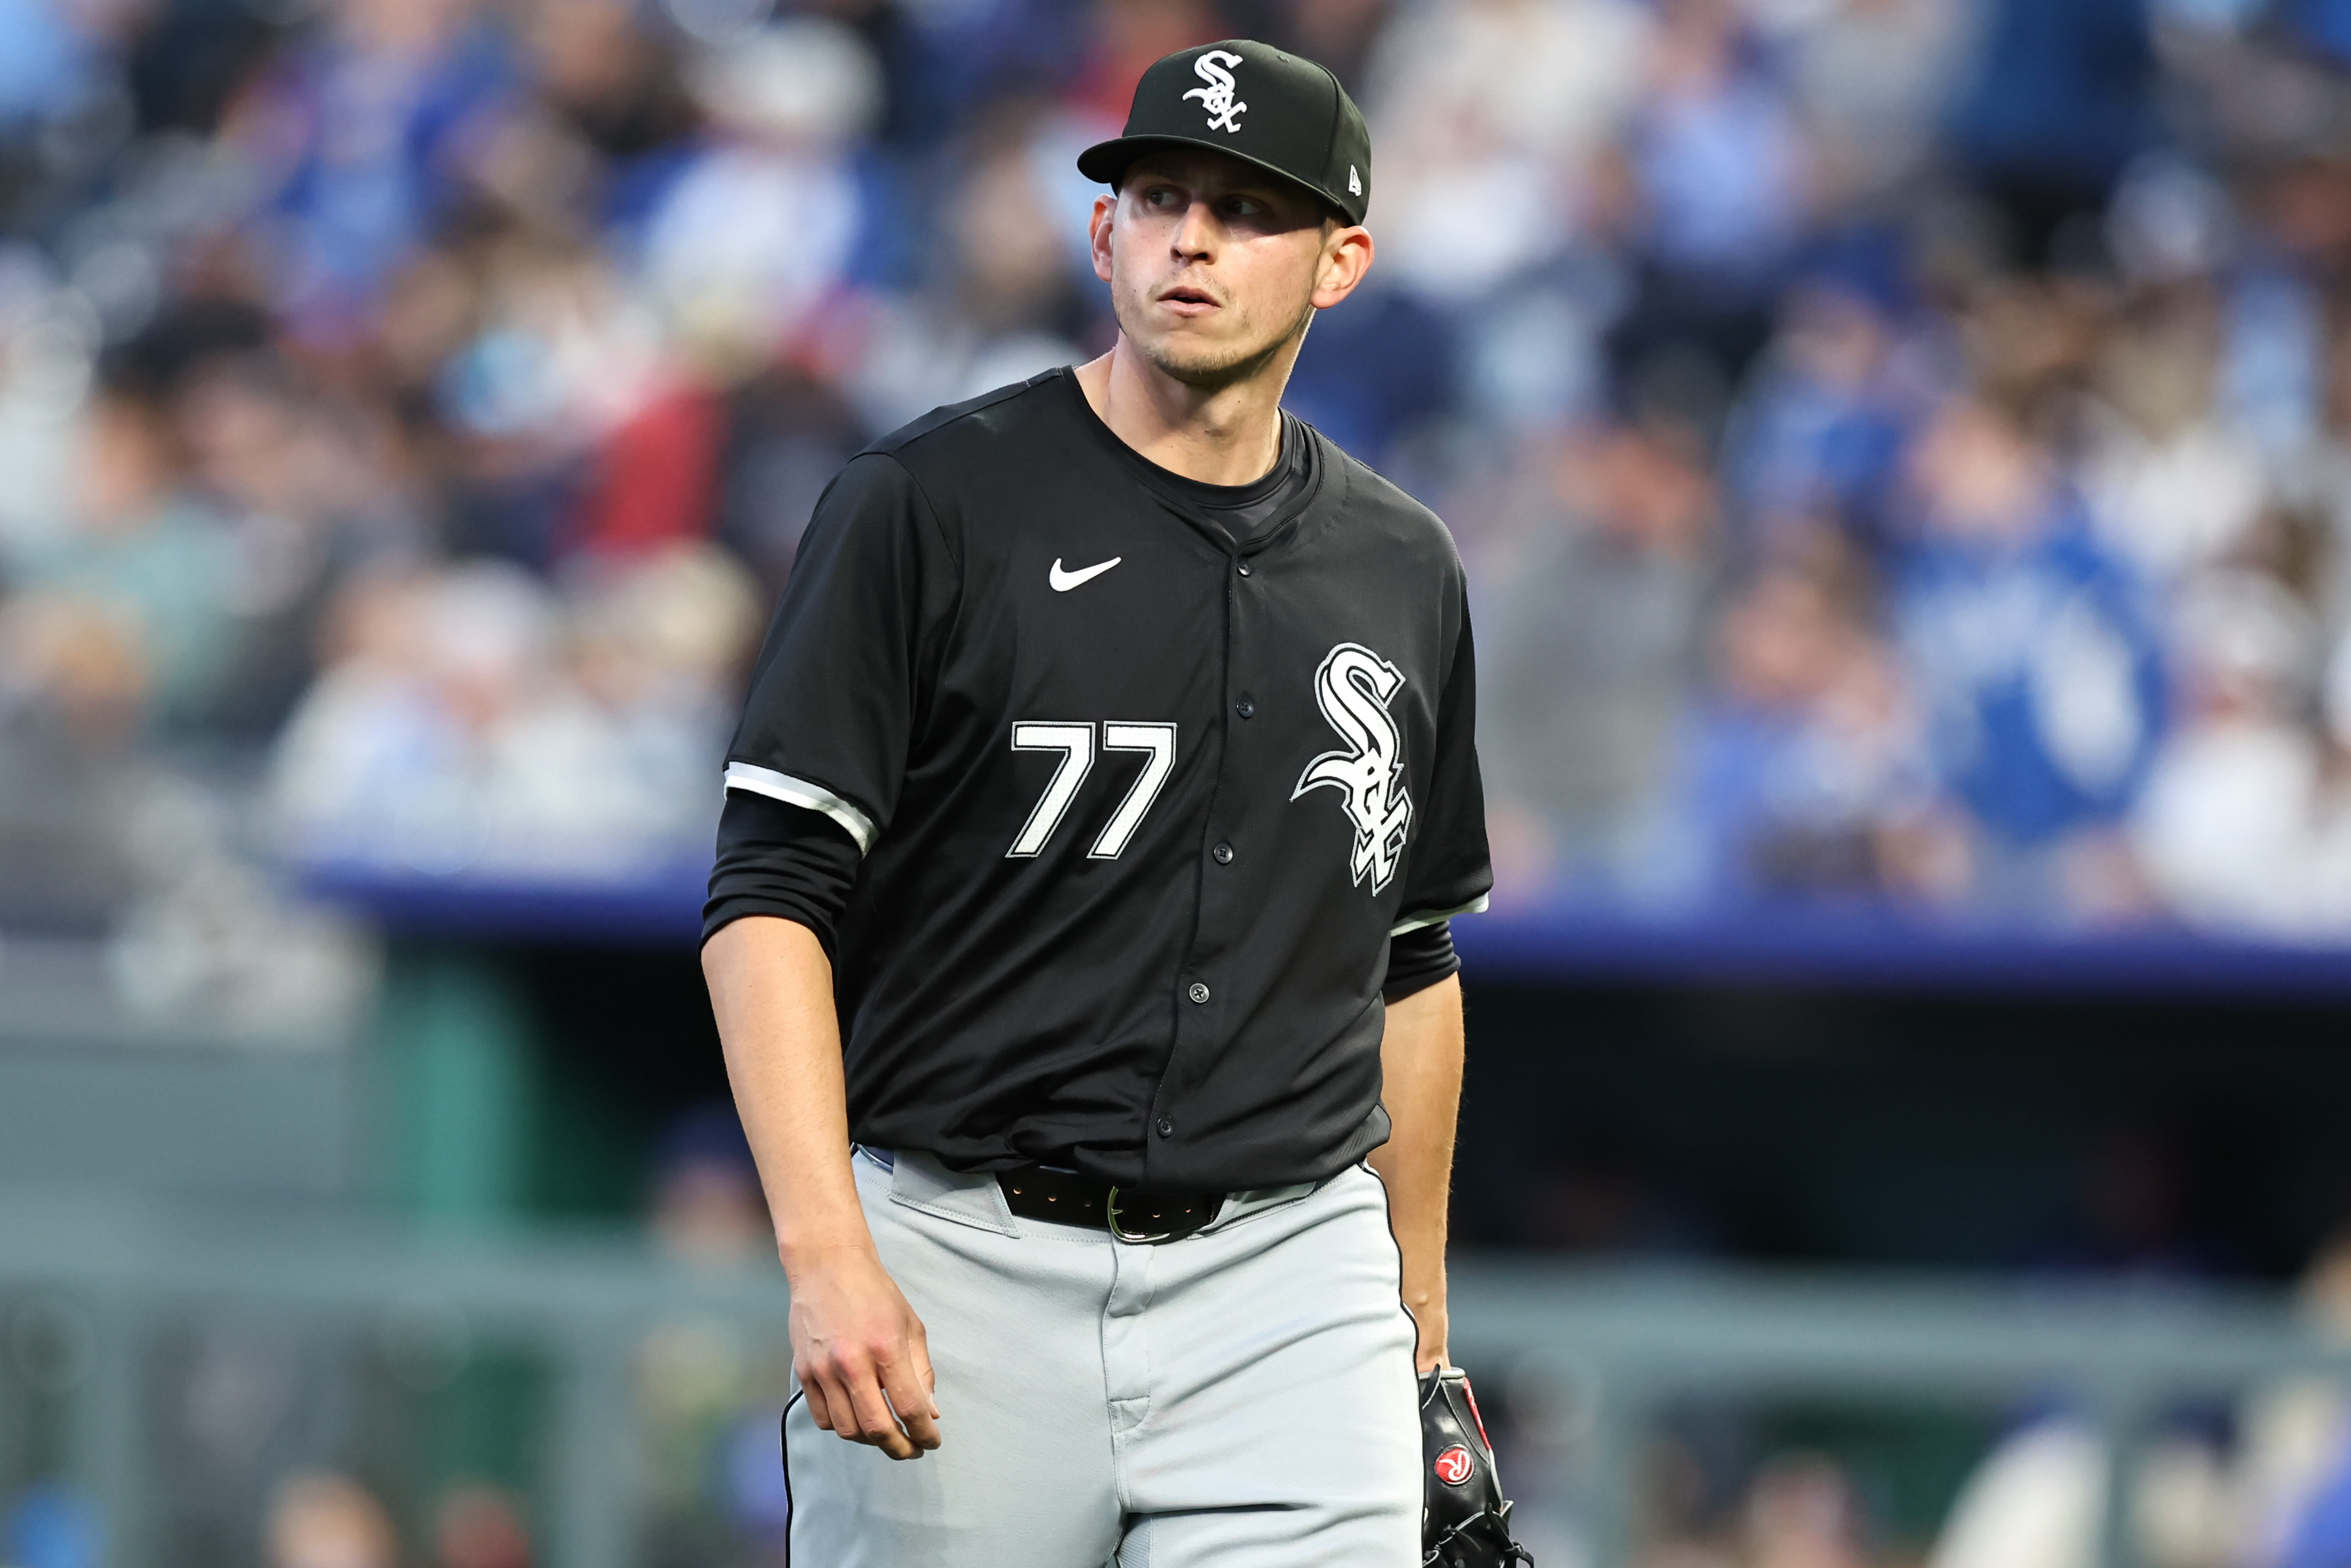 New White Sox trade rumor emerges with team playing well recently